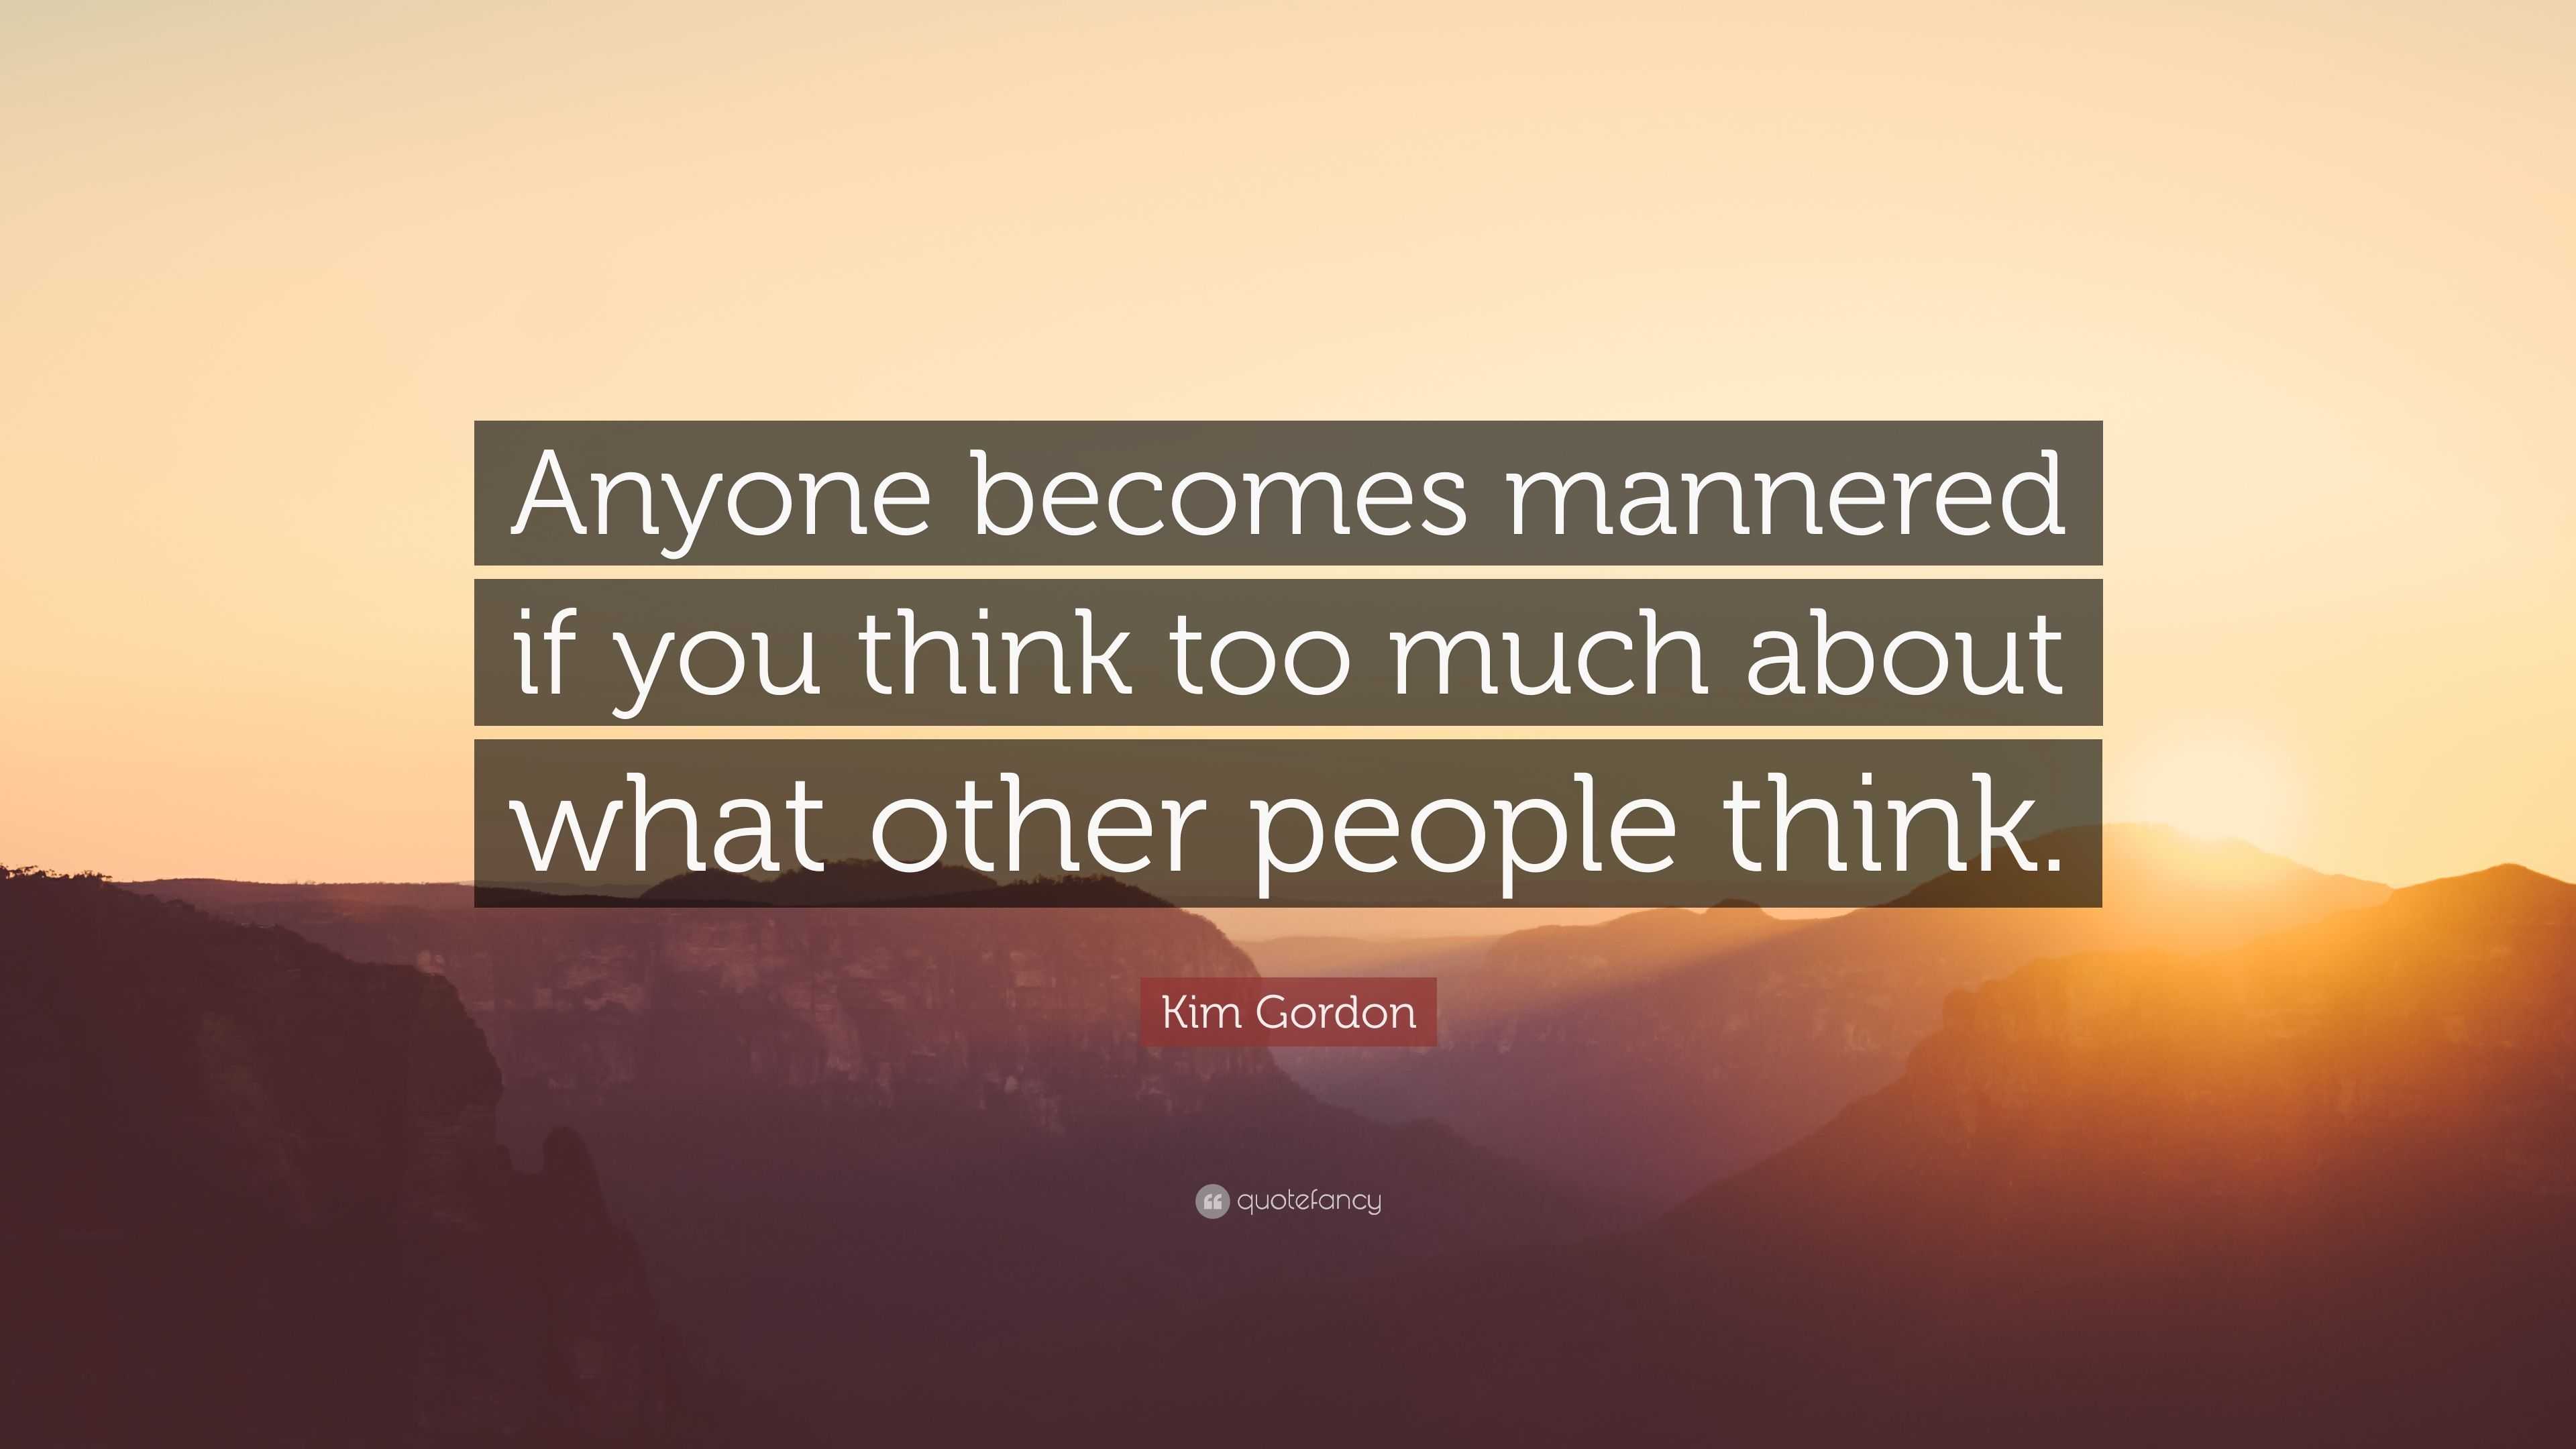 Kim Gordon Quote: “Anyone becomes mannered if you think too much about ...